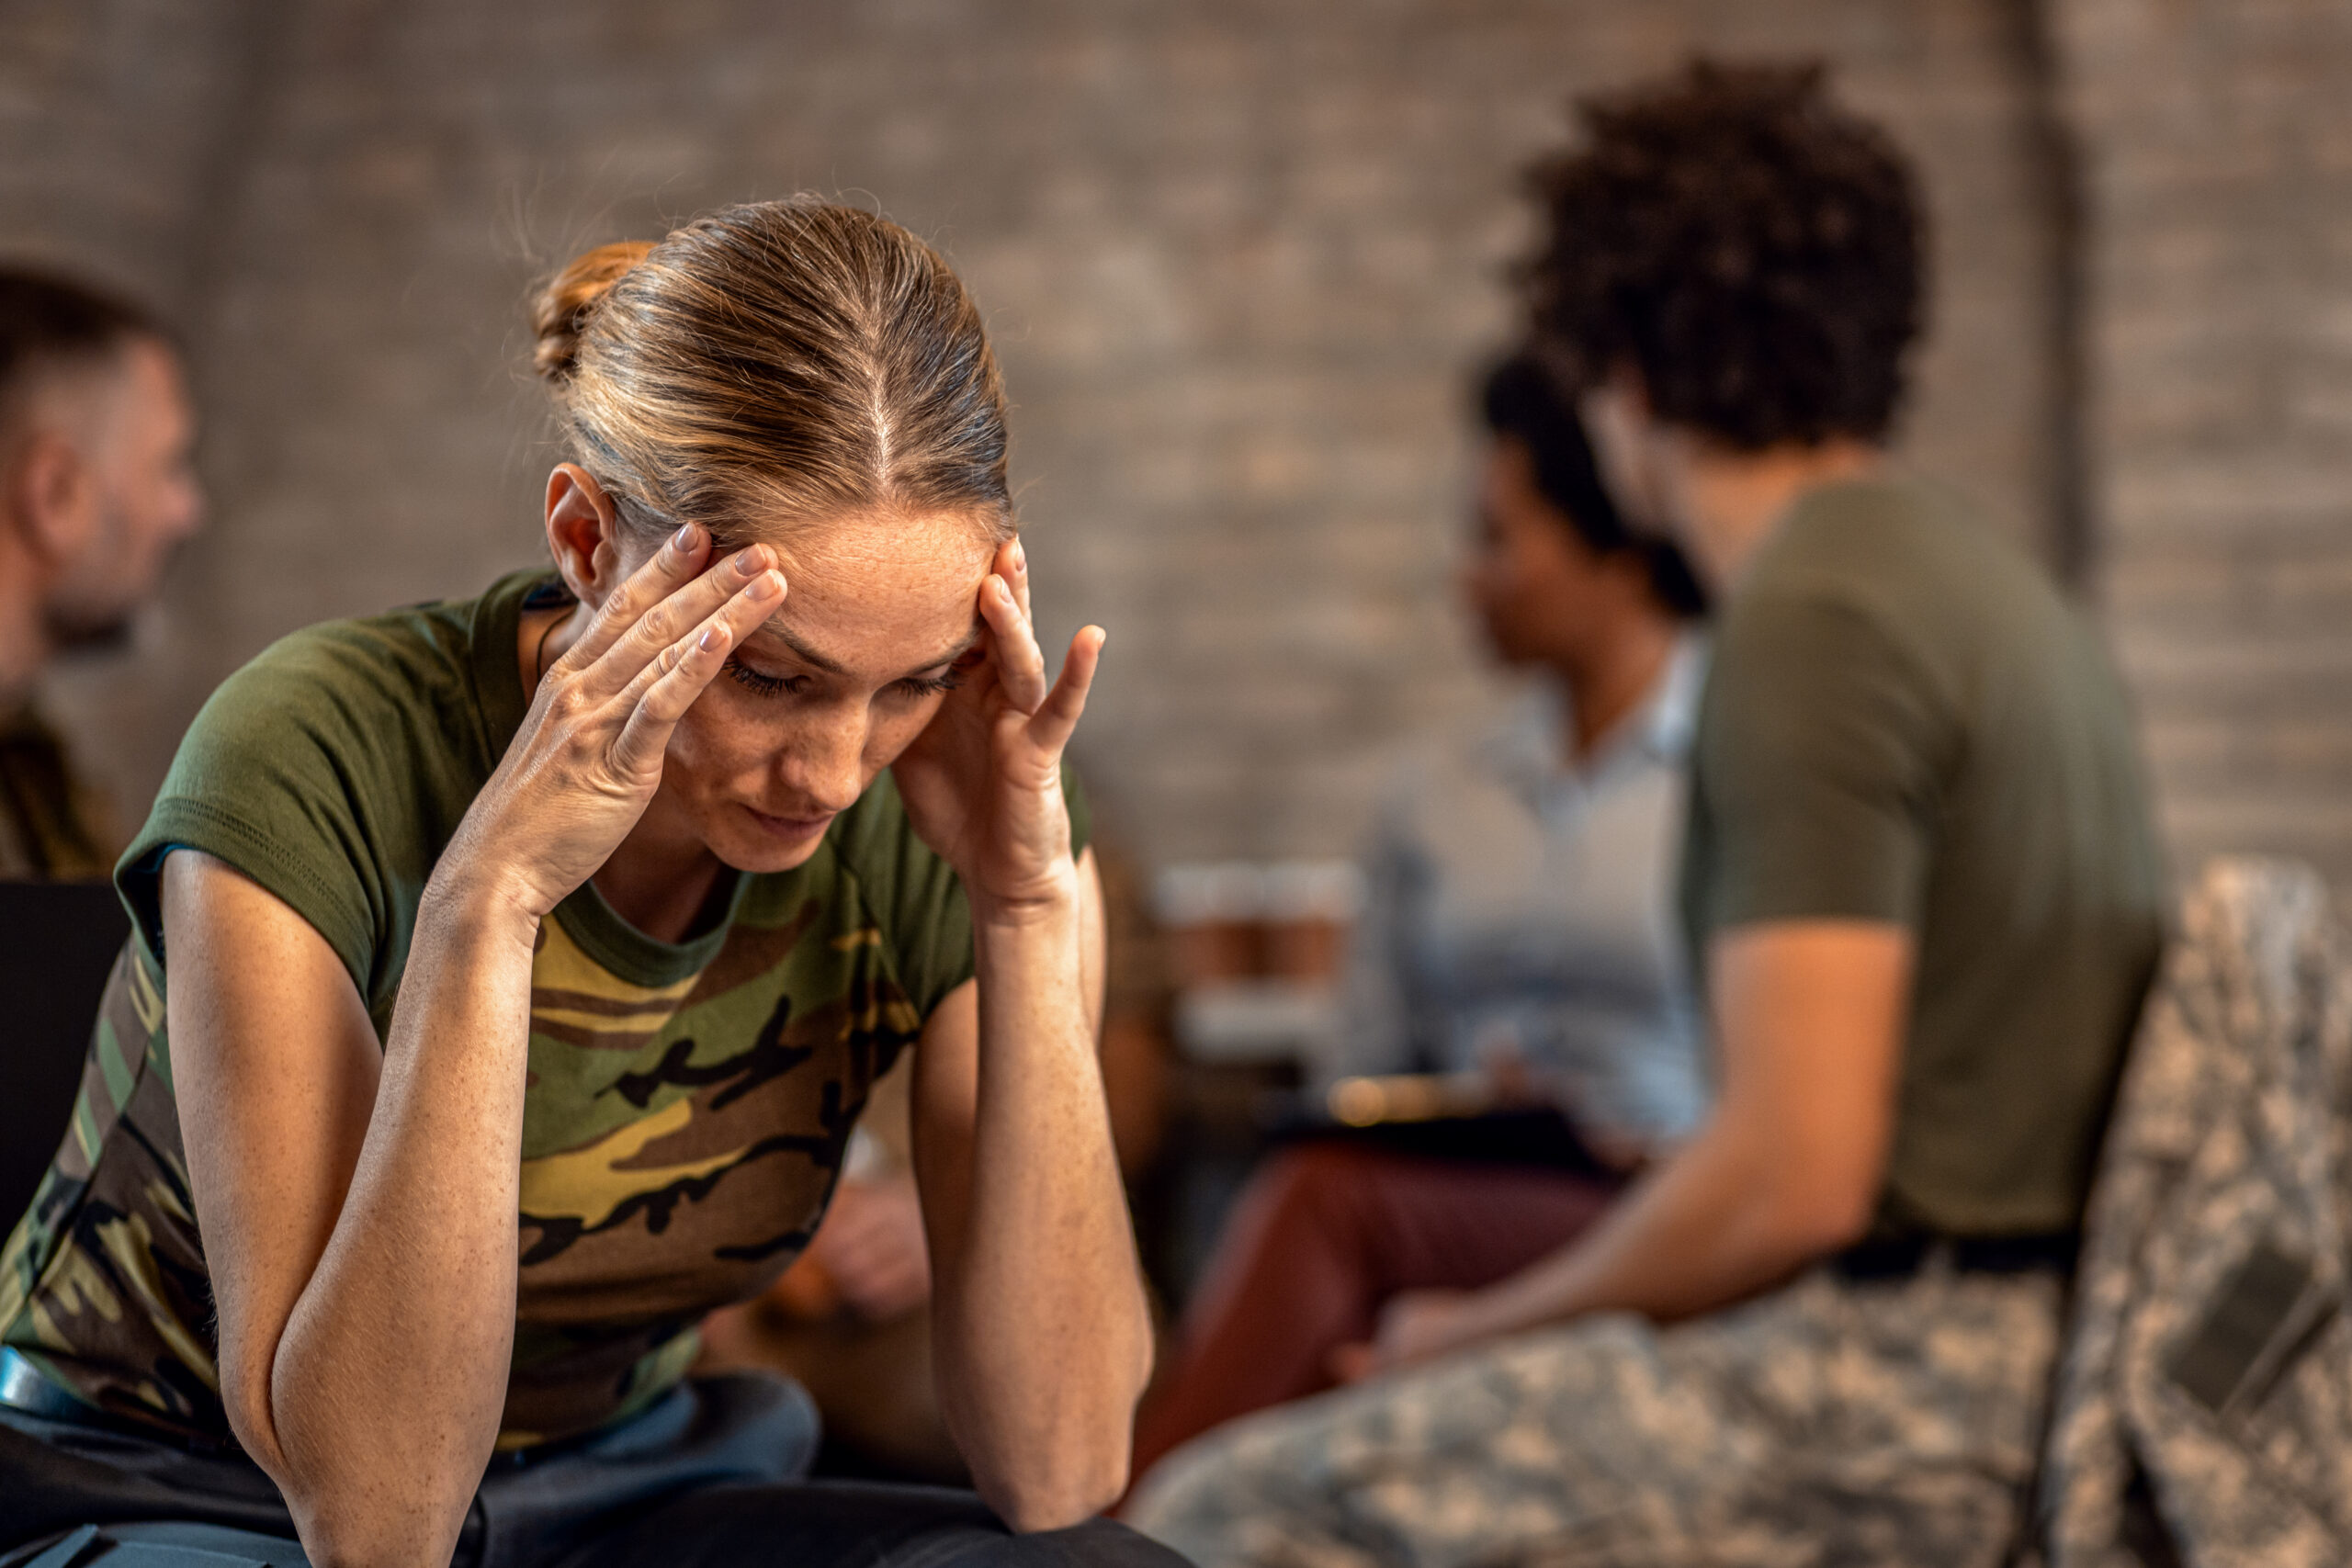 A first responder with her head in her hands sits in a therapy group, visibly distressed, as she copes with alcohol-related challenges.